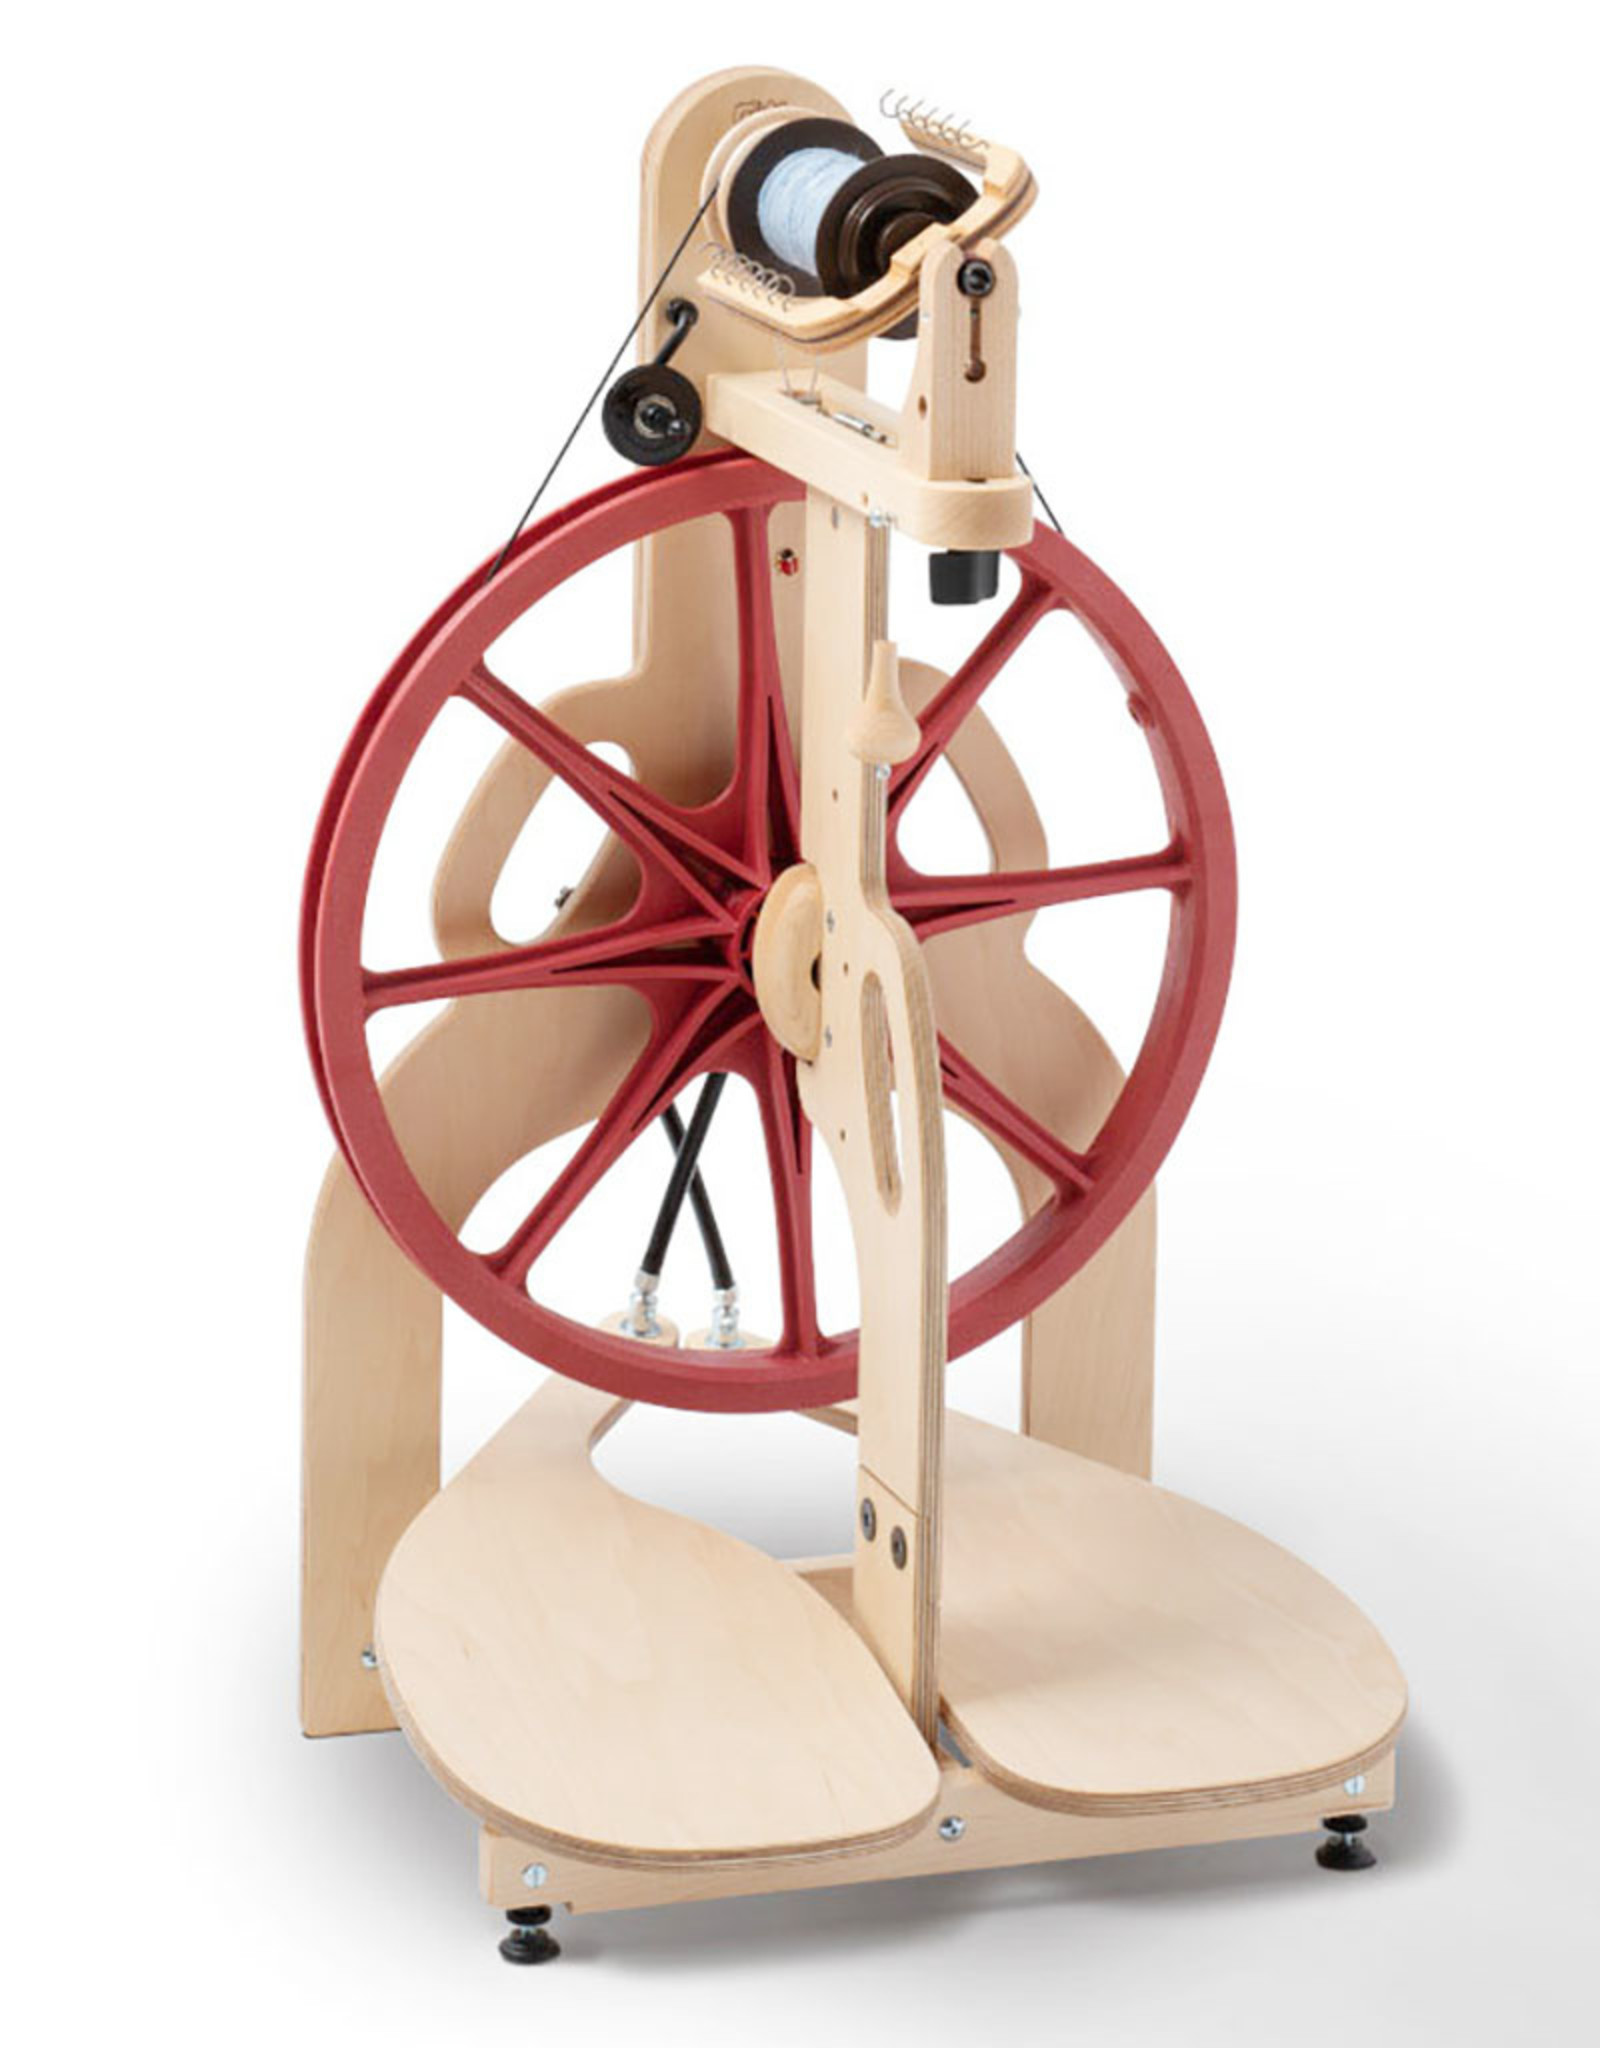 Schacht Spindle Company Ladybug Spinning Wheel